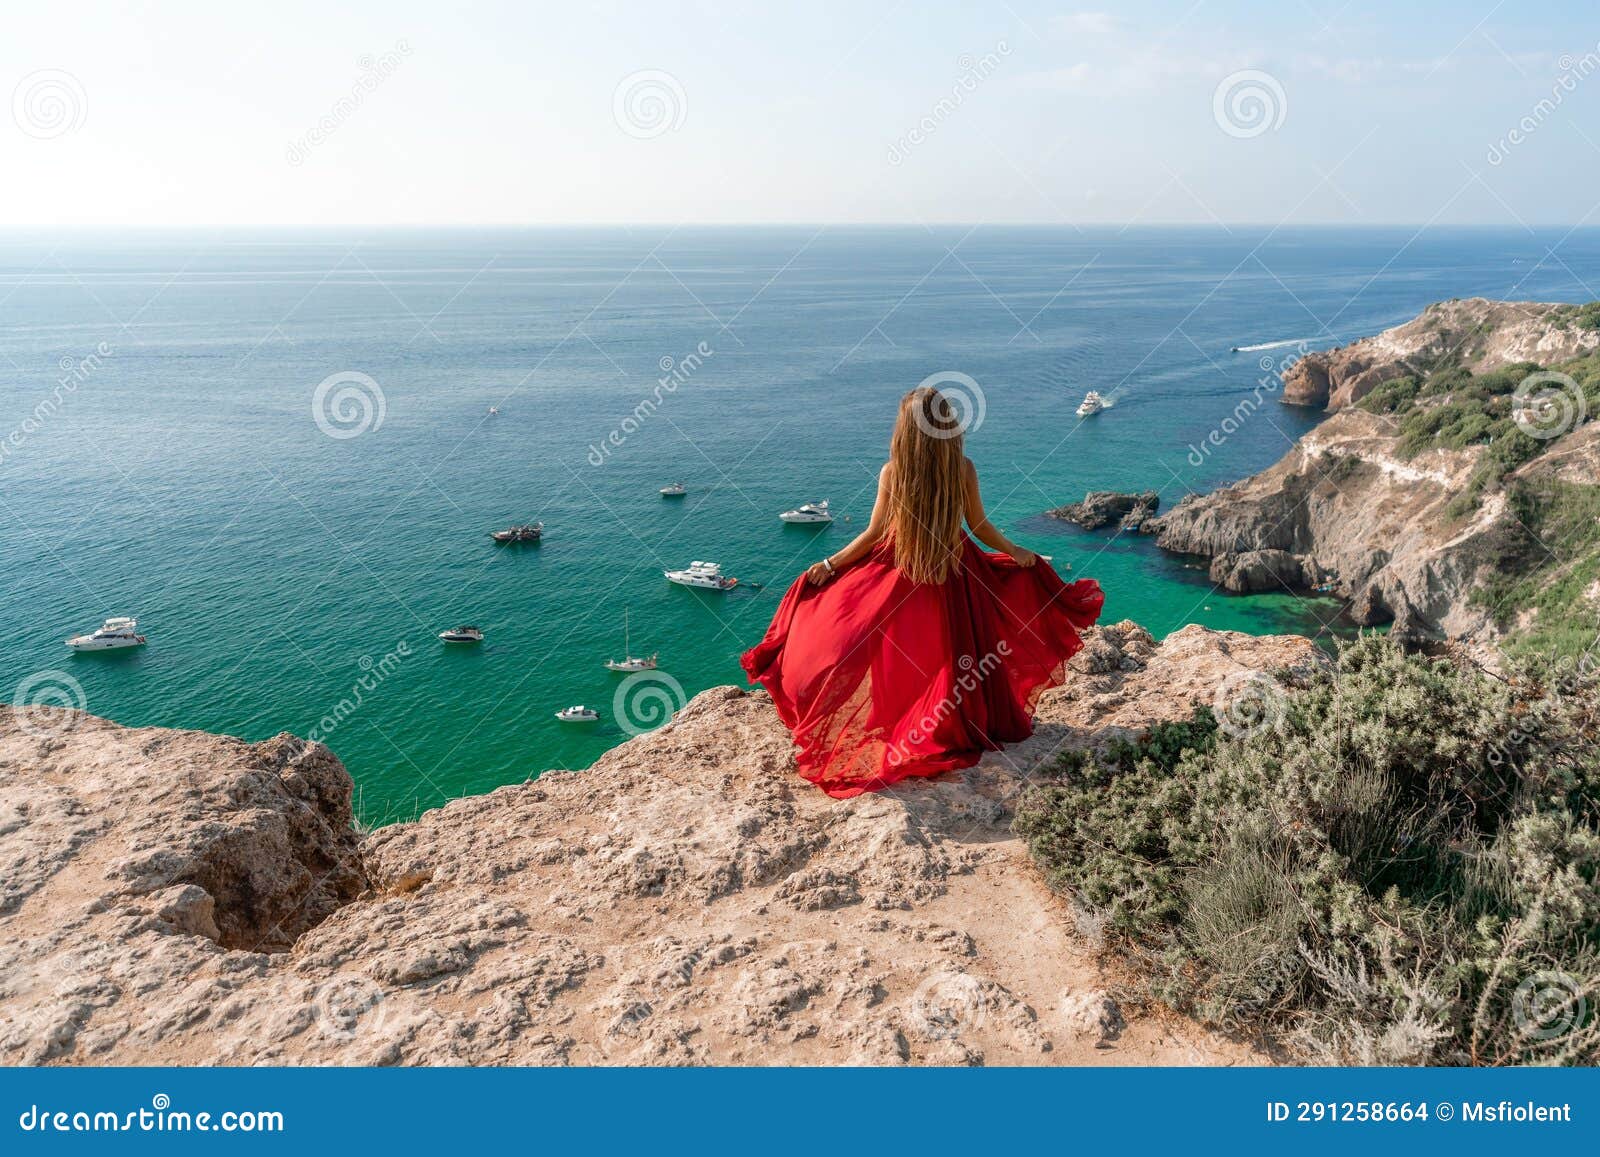 Woman Sea Red Dress Yachts A Beautiful Woman In A Red Dress Poses On A